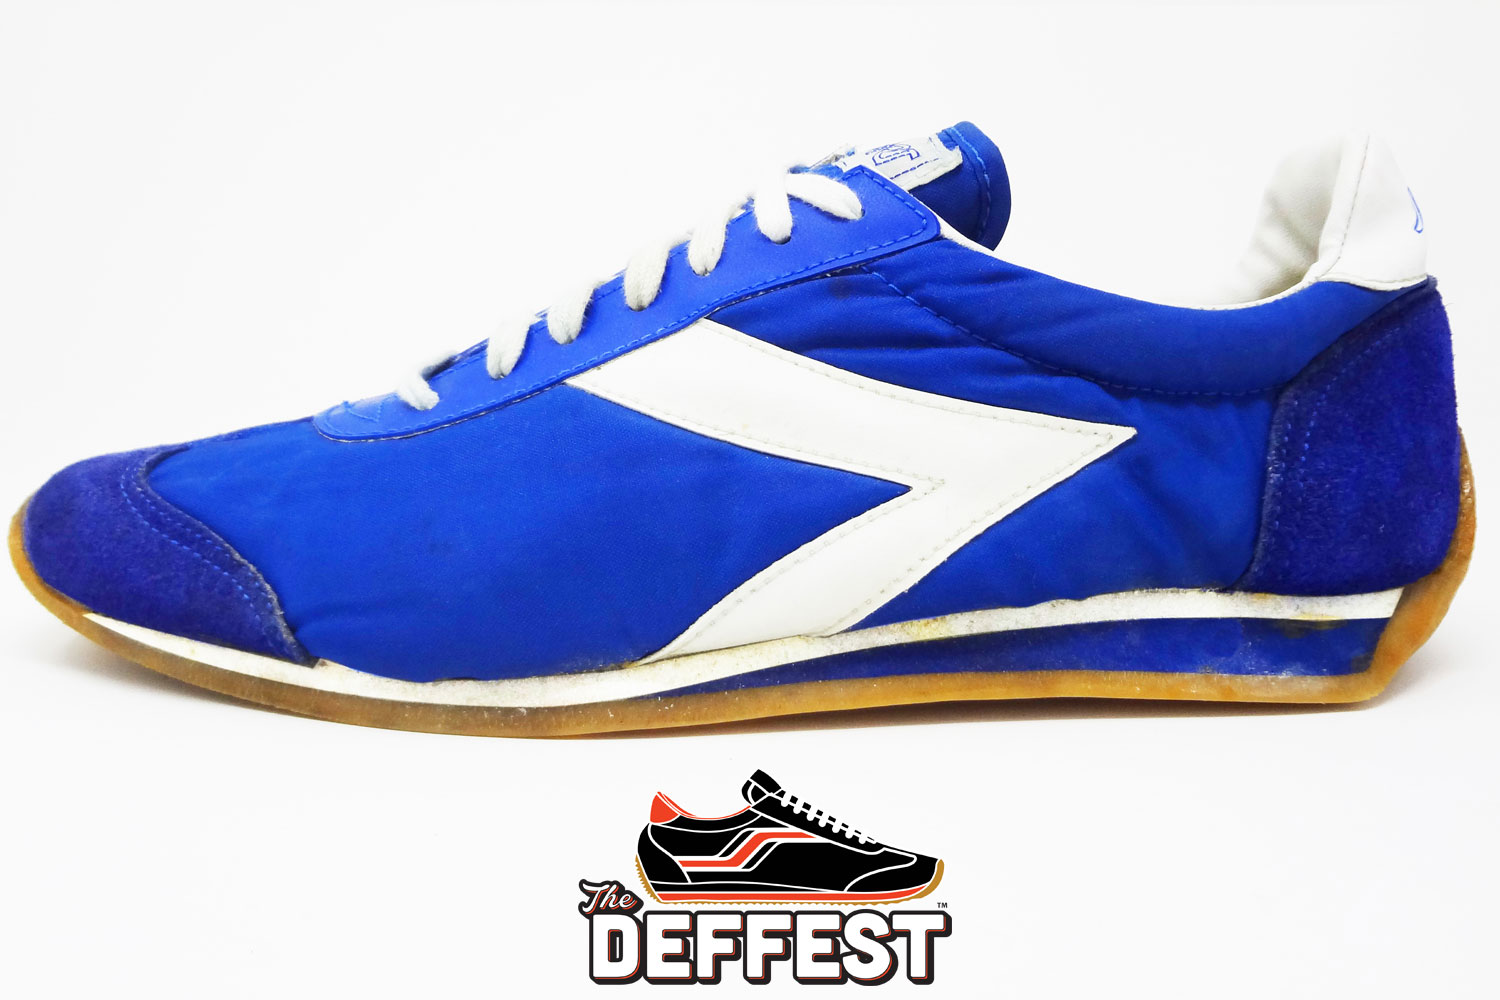 Sport brand 70s vintage sneakers profile @ The Deffest